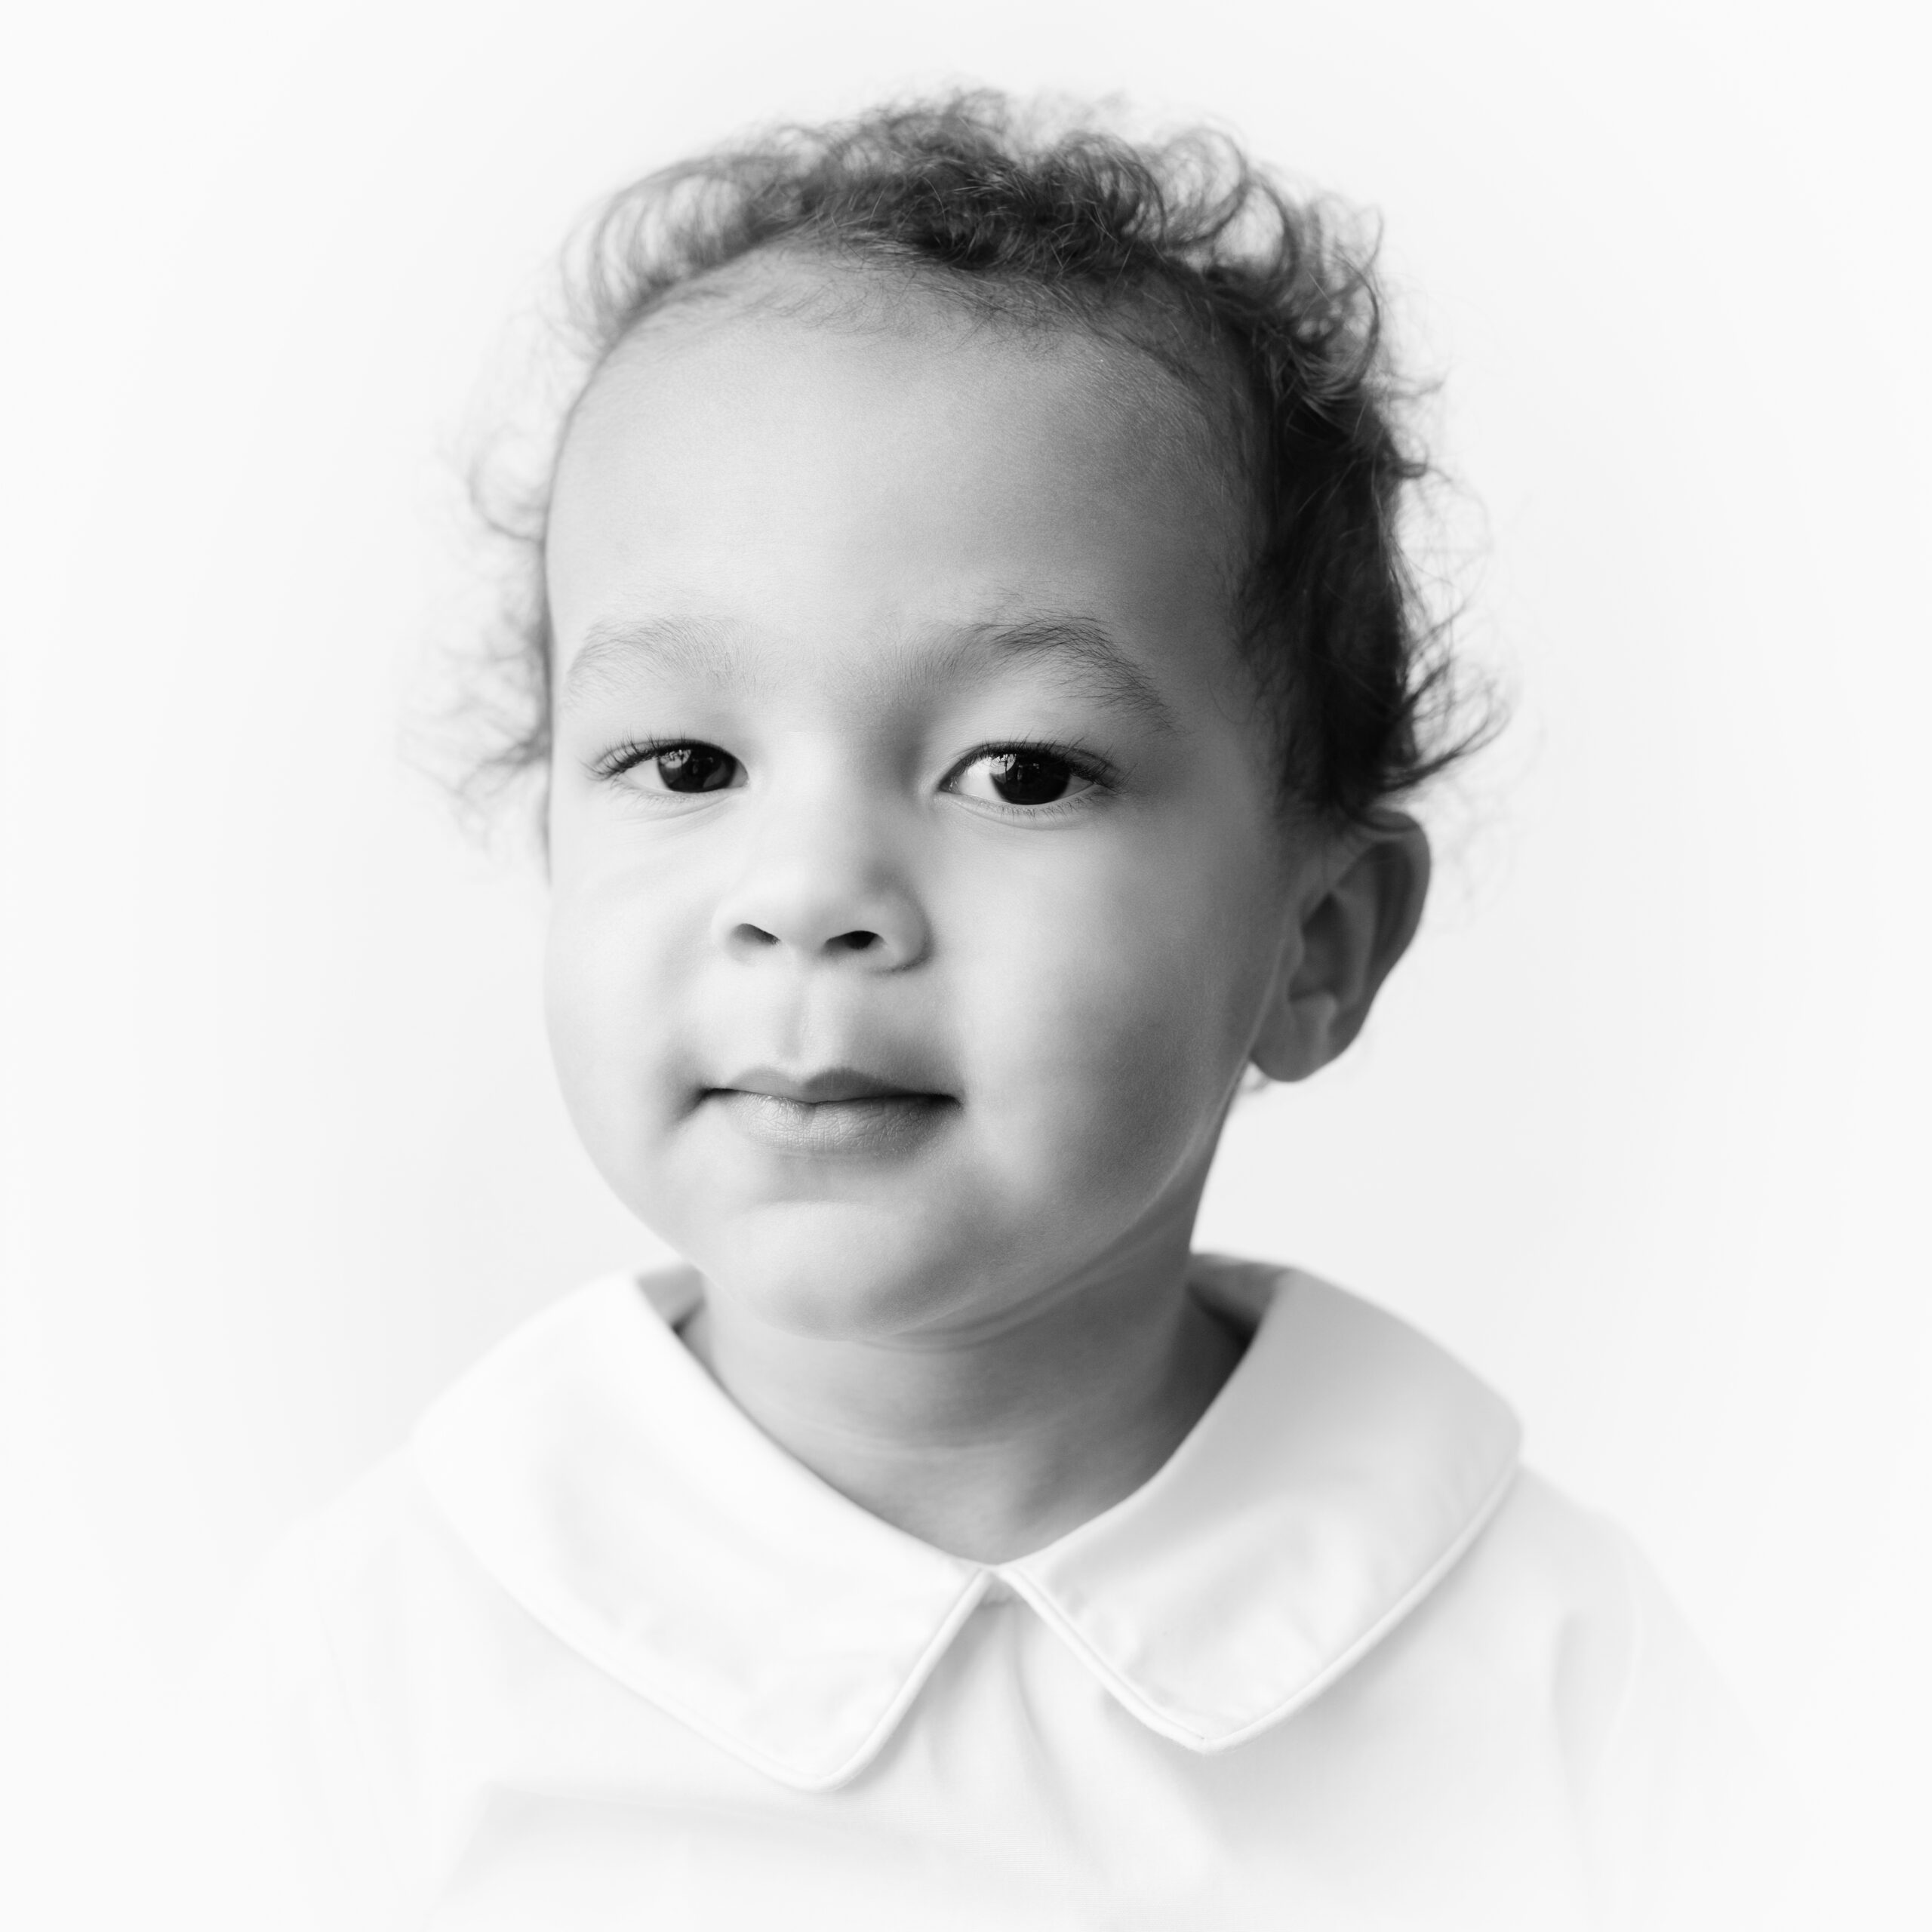 Black and white heirloom portrait of young boy smiling at camera.